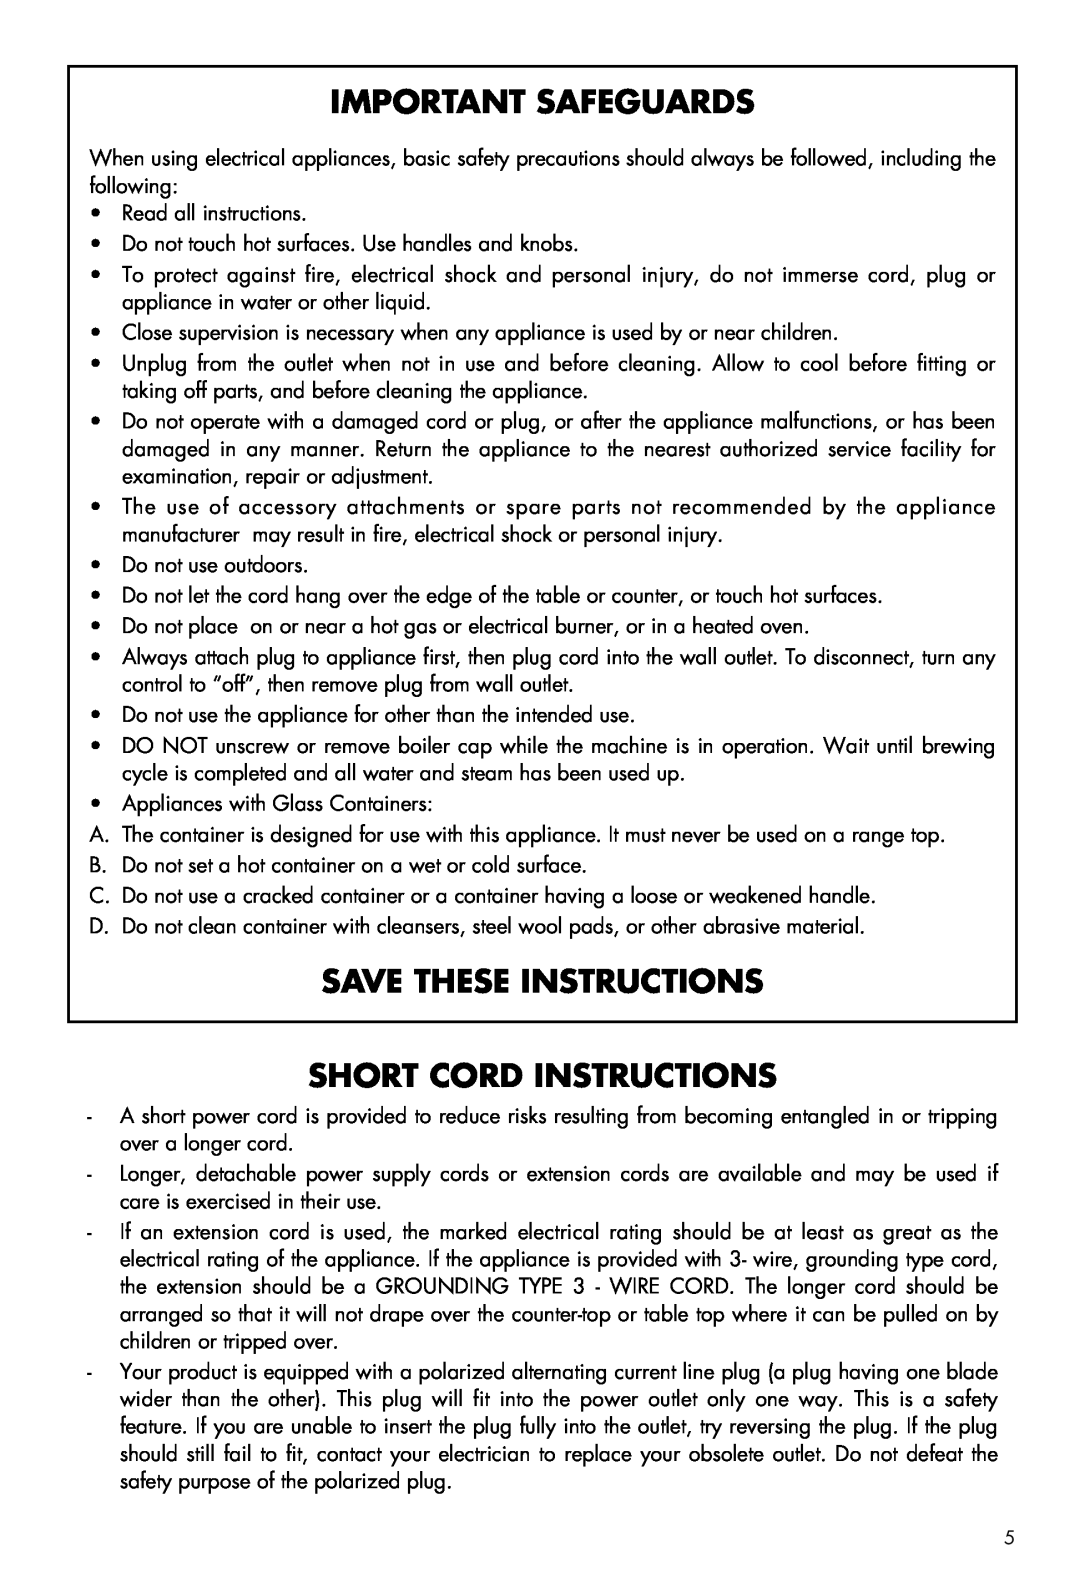 DeLonghi BCO80 manual Important Safeguards, Save These Instructions Short Cord Instructions 